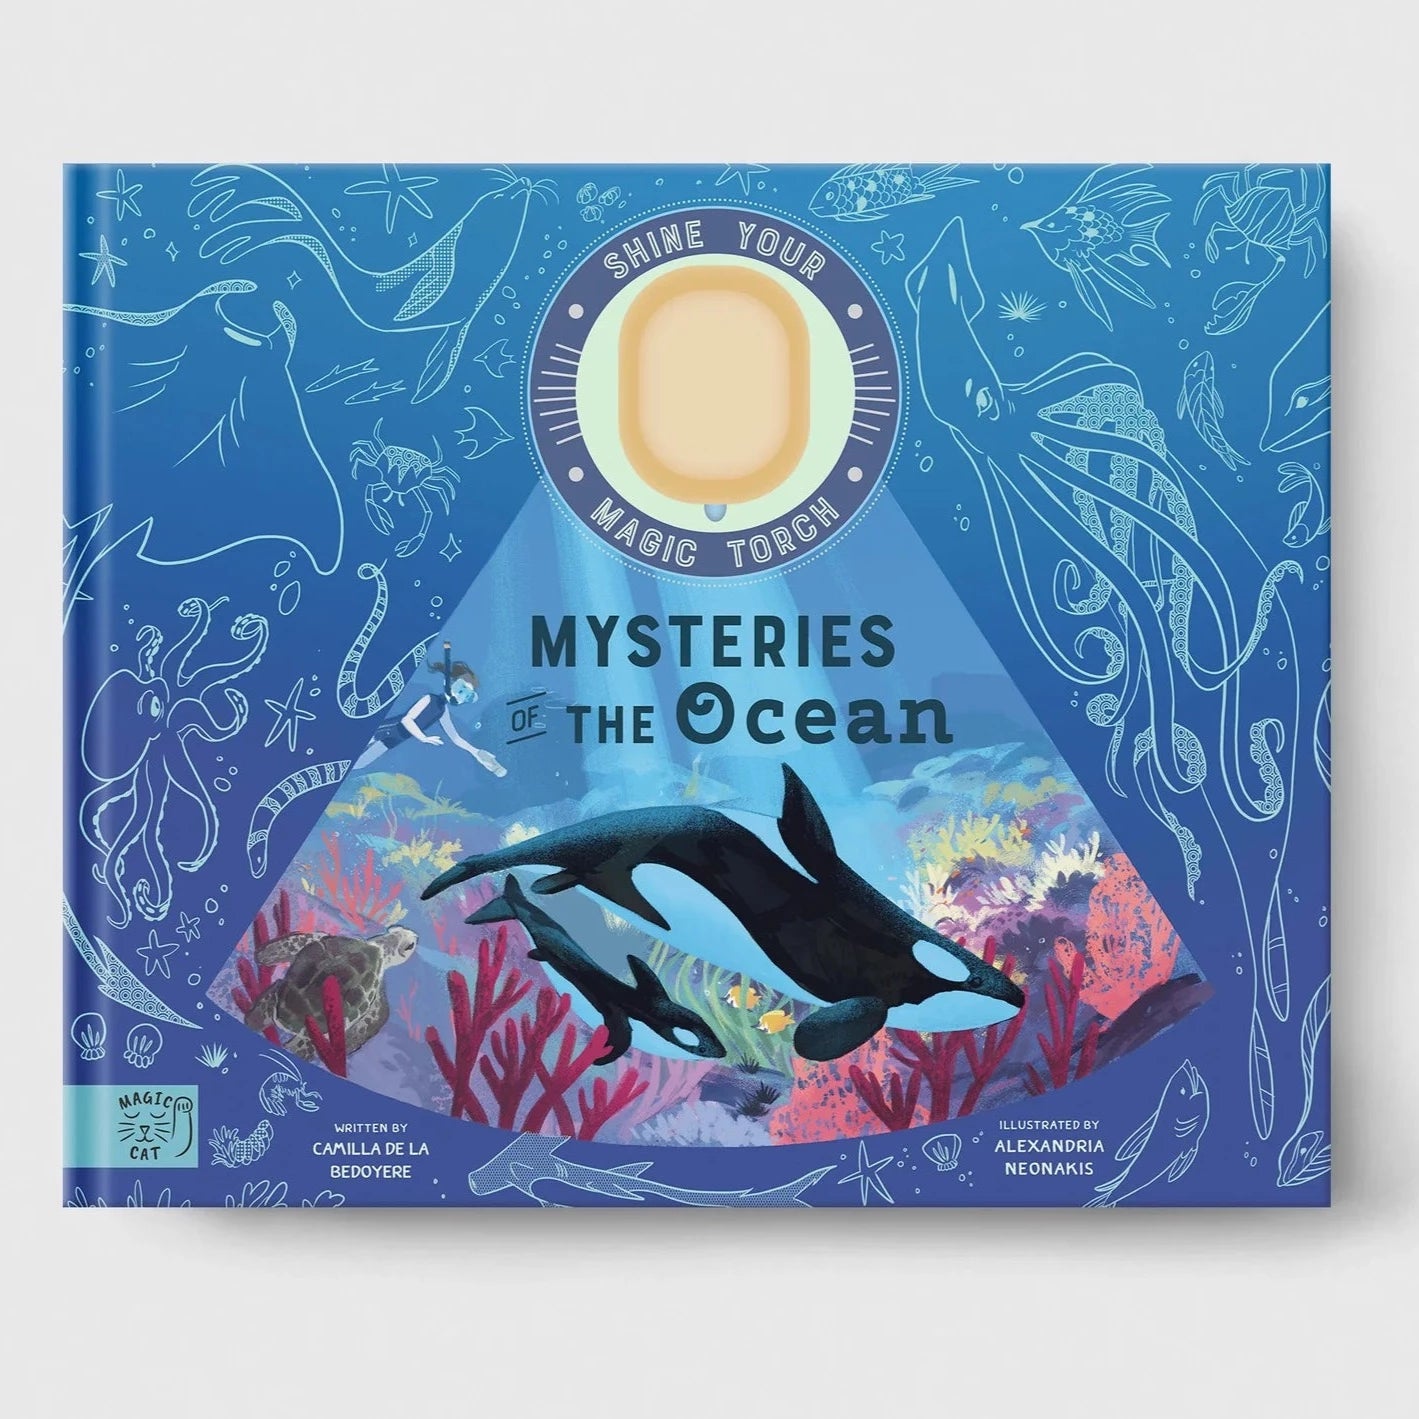 Mysteries of the Ocean: Includes Magic Torch Which Illuminates More Than 50 Marine Animals (Shine Your Magic Torch) 